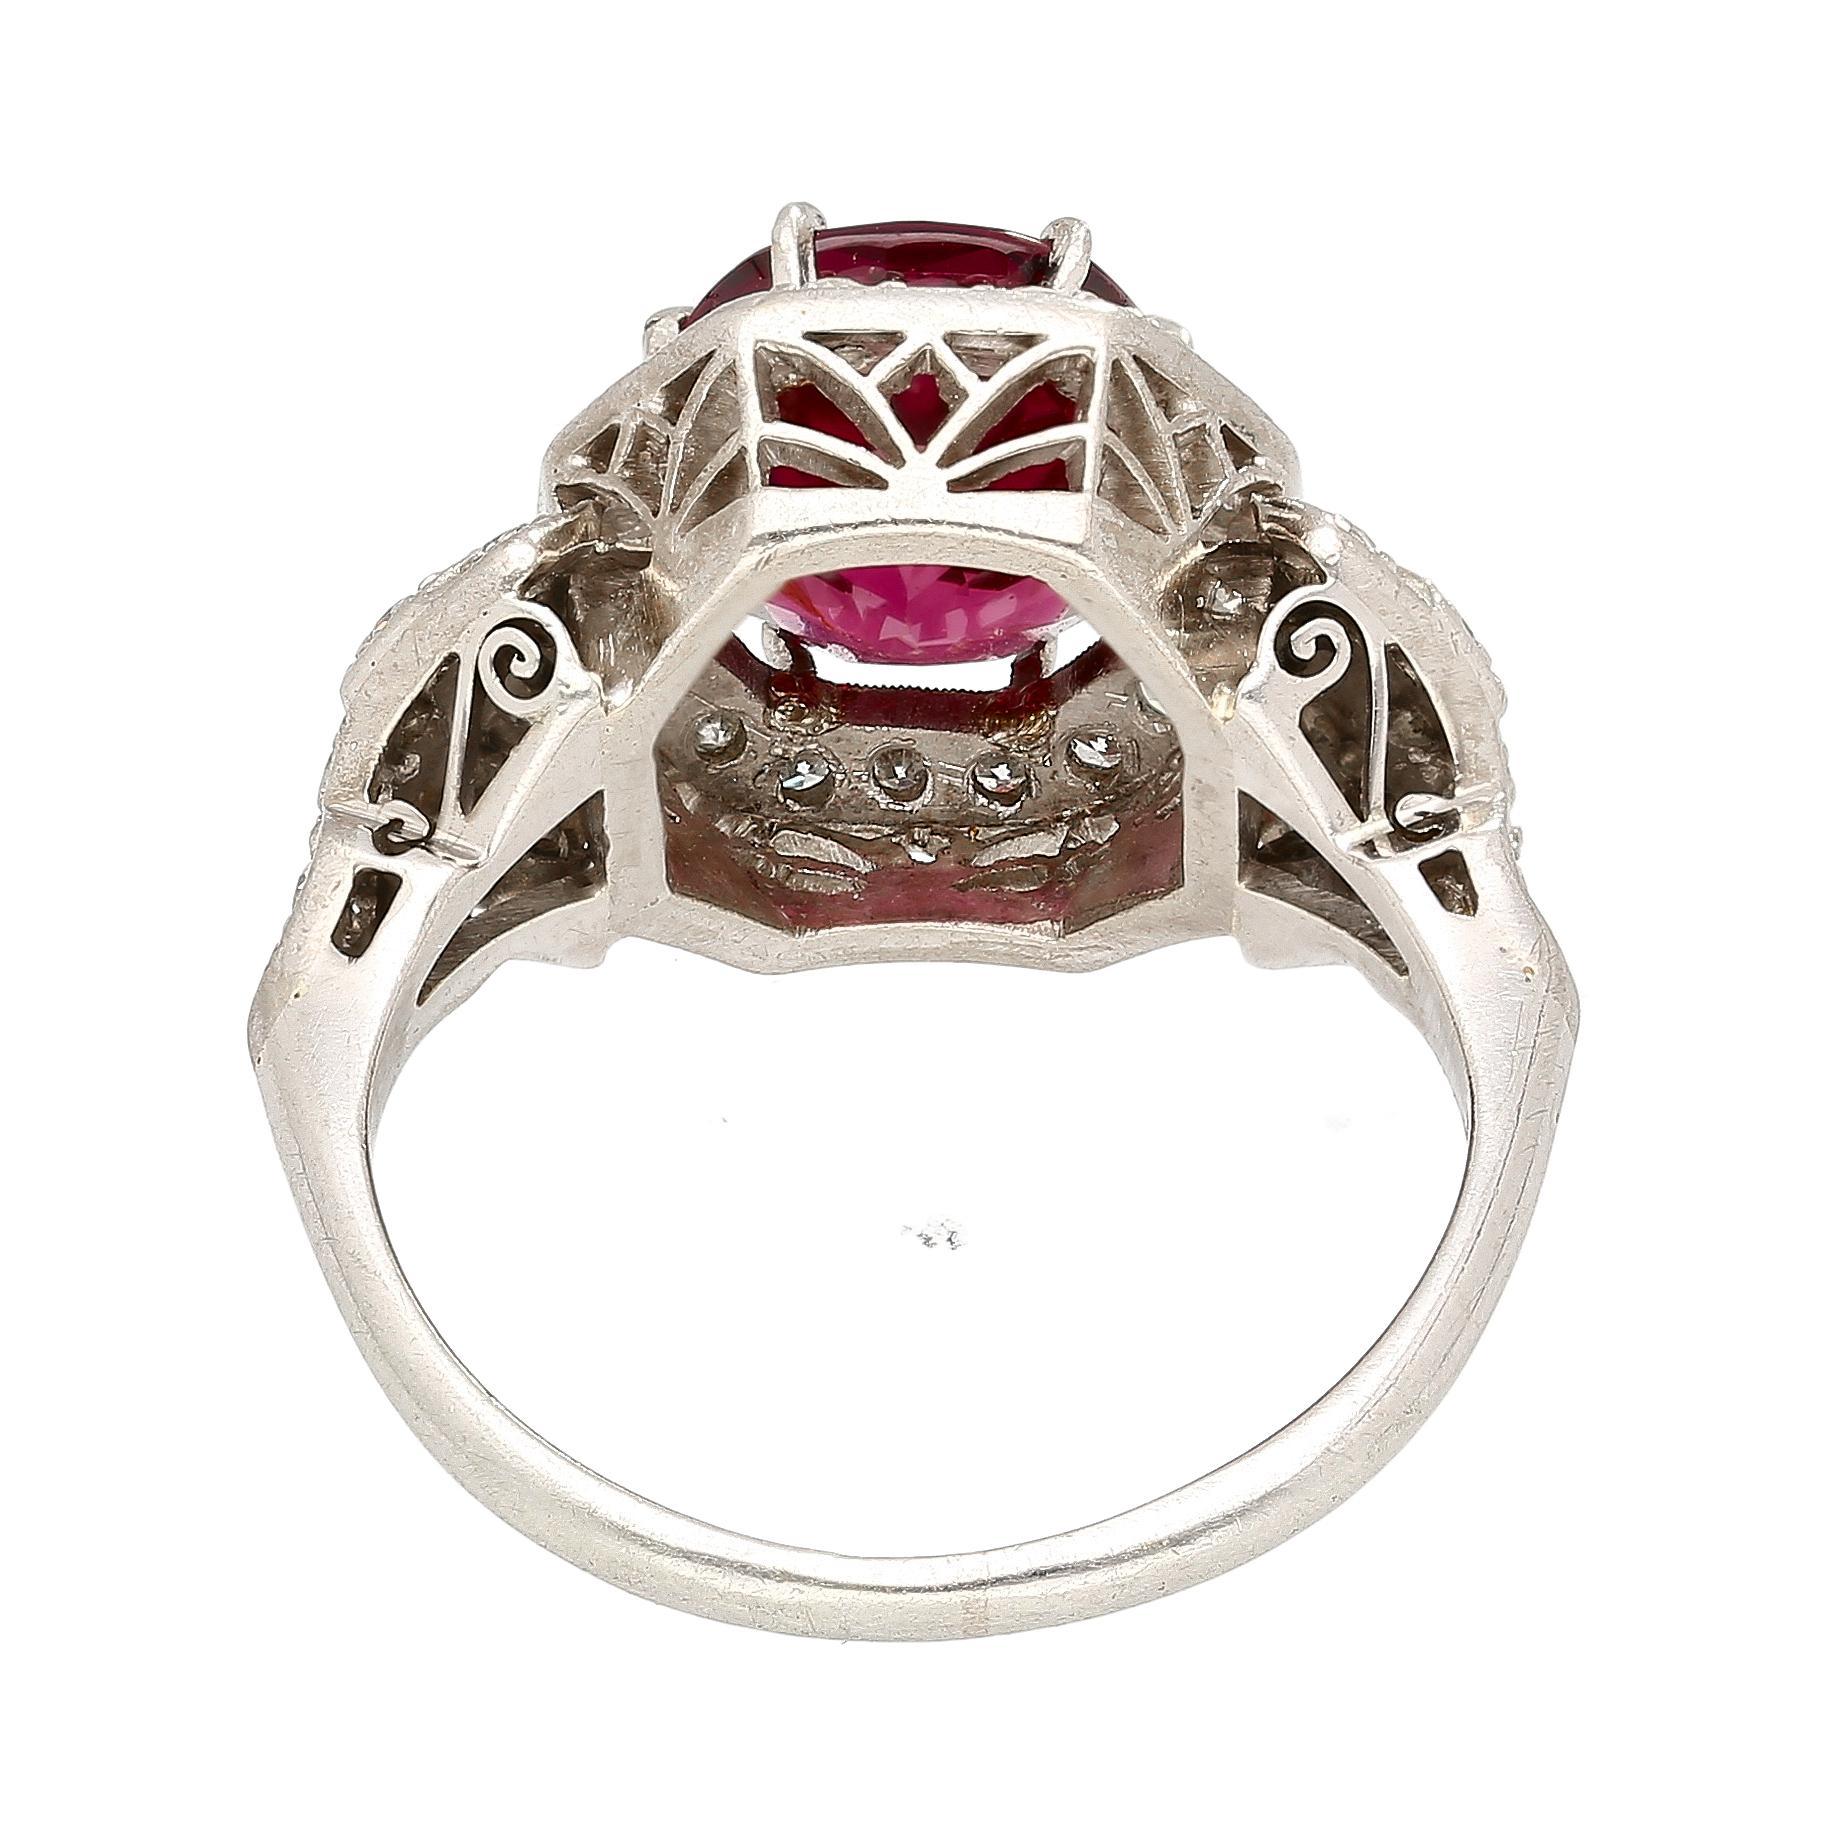 Vintage Art Deco GIA Certified No Heat Spinel 18K Gold and Platinum Ring. 

This cathedral ring features a natural red spinel center gemstone. The spinel carries a carat weight of 4.35 and holds a red hue. There is no evidence of heat treatment on